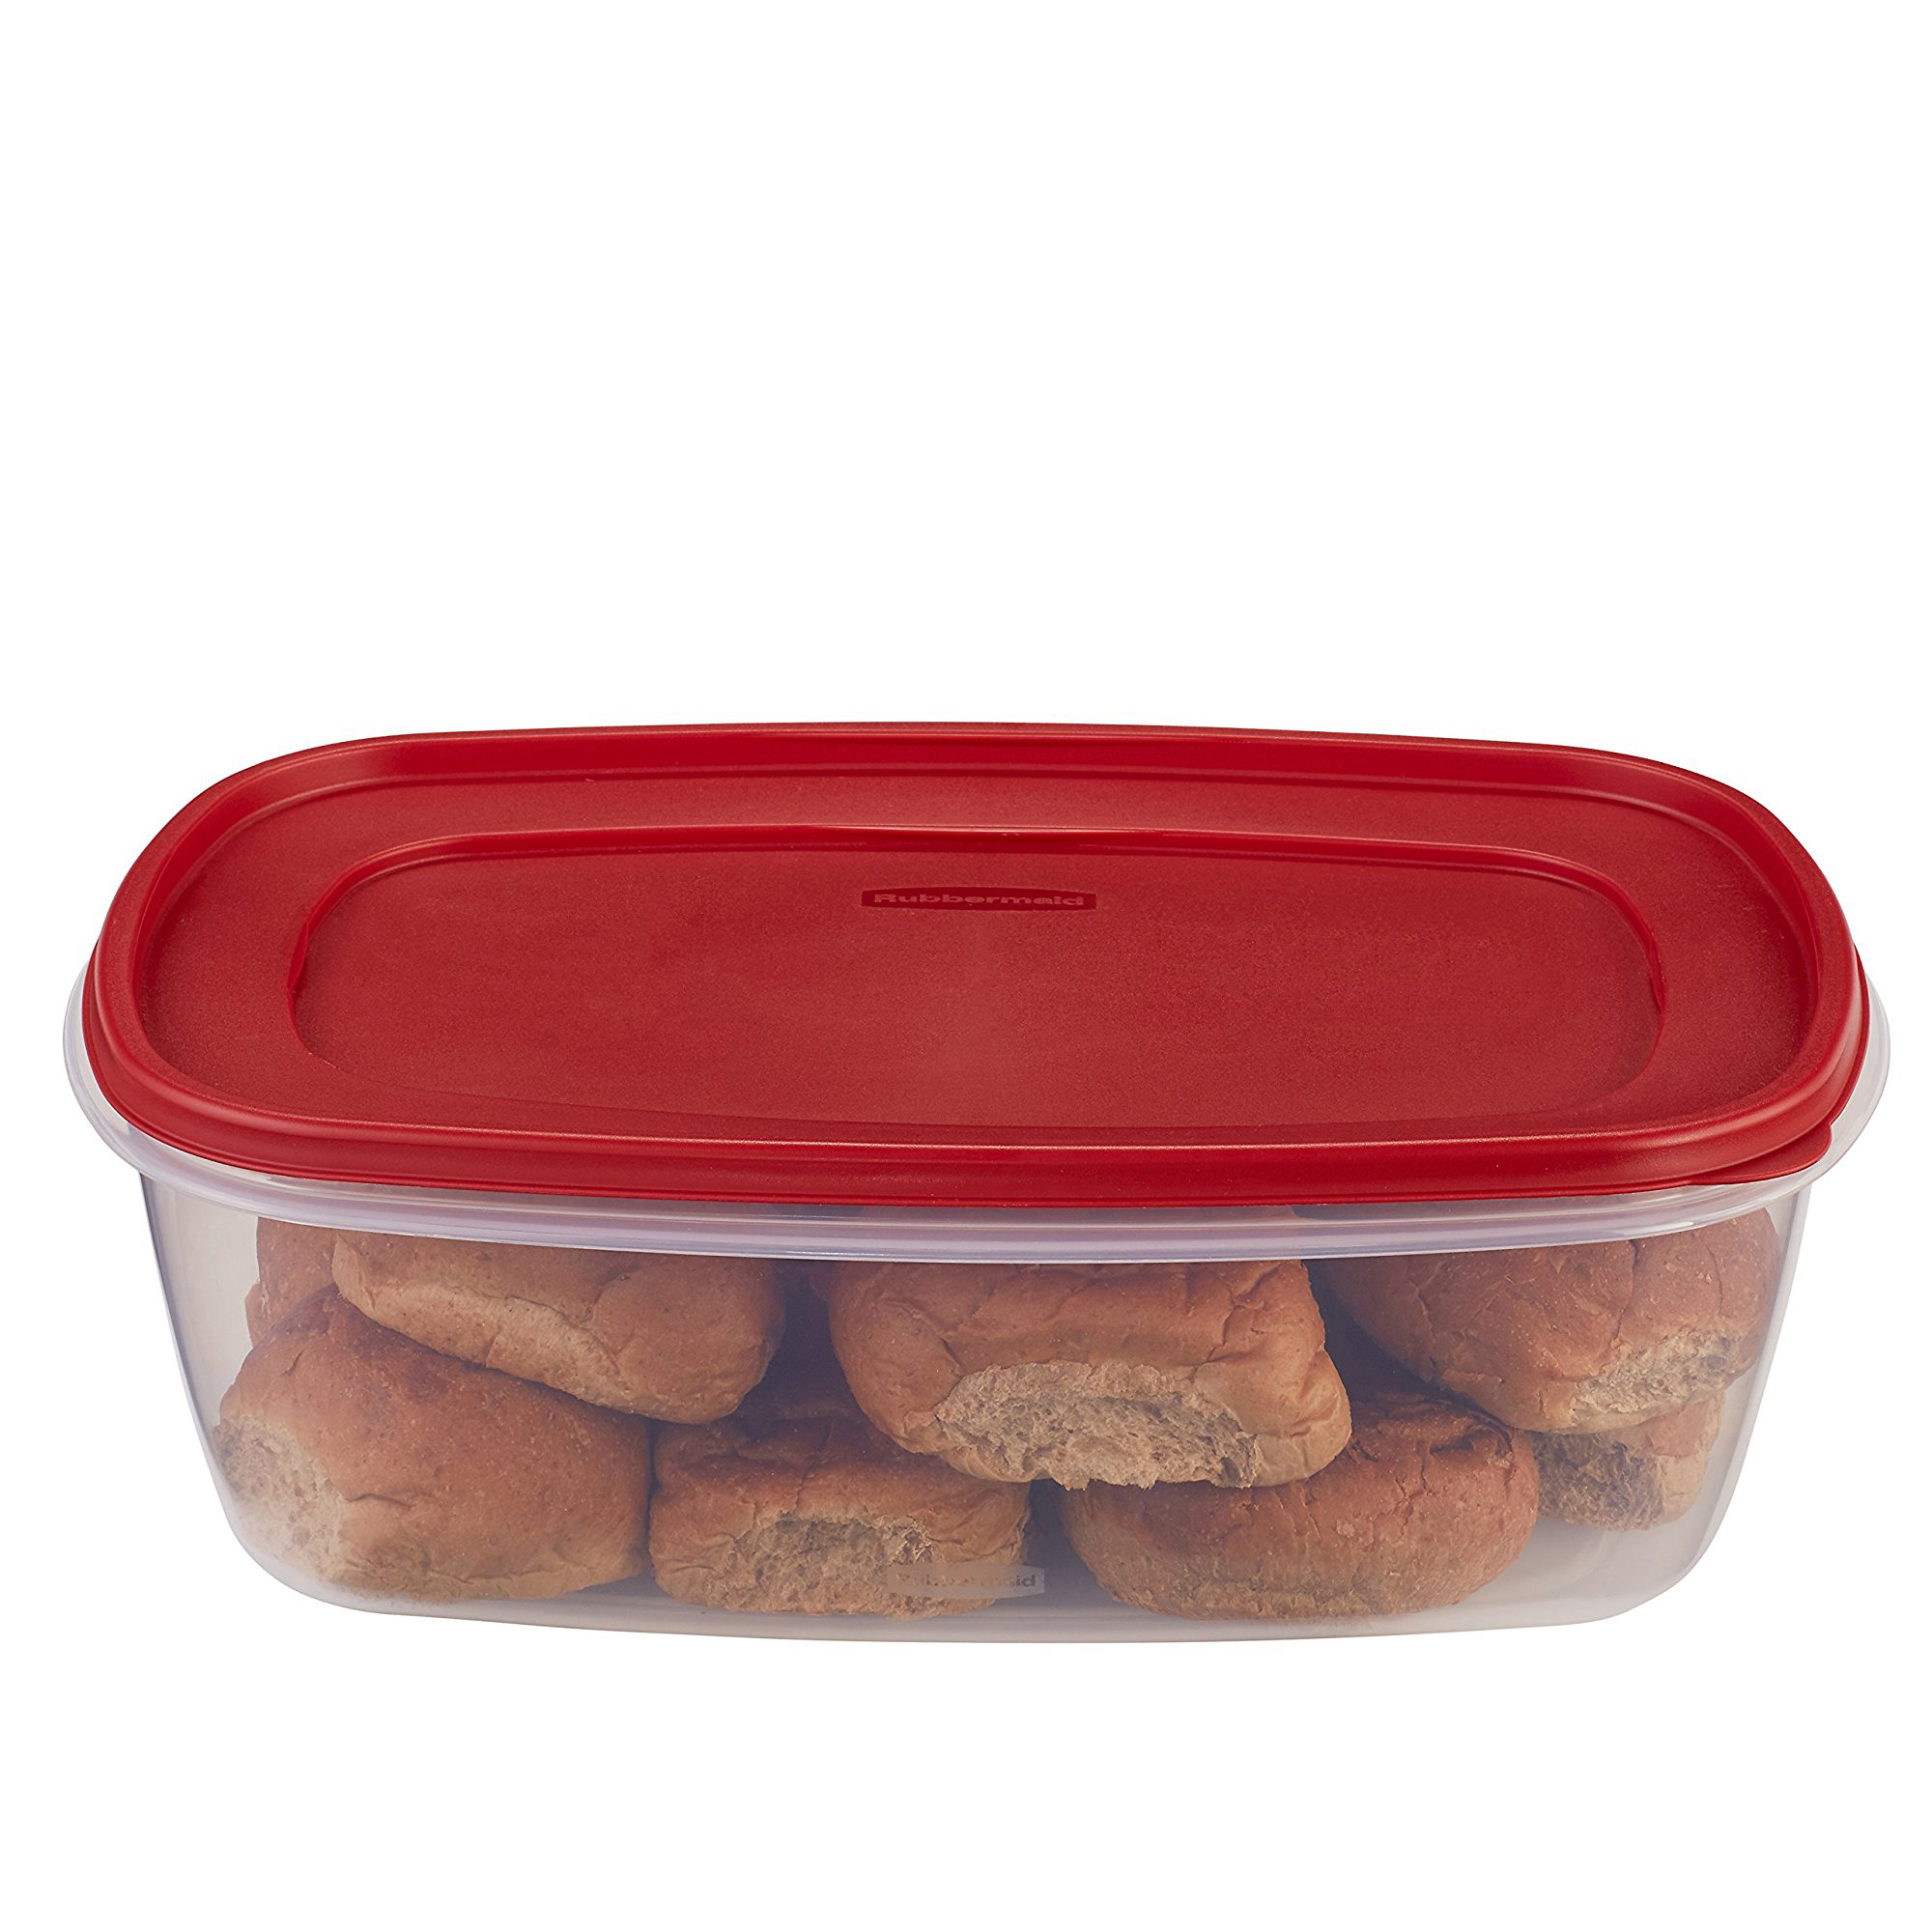 Rubbermaid Easy Find Lids Food Storage Container, Large with Red Lid, 2.5 Gallon - image 5 of 8